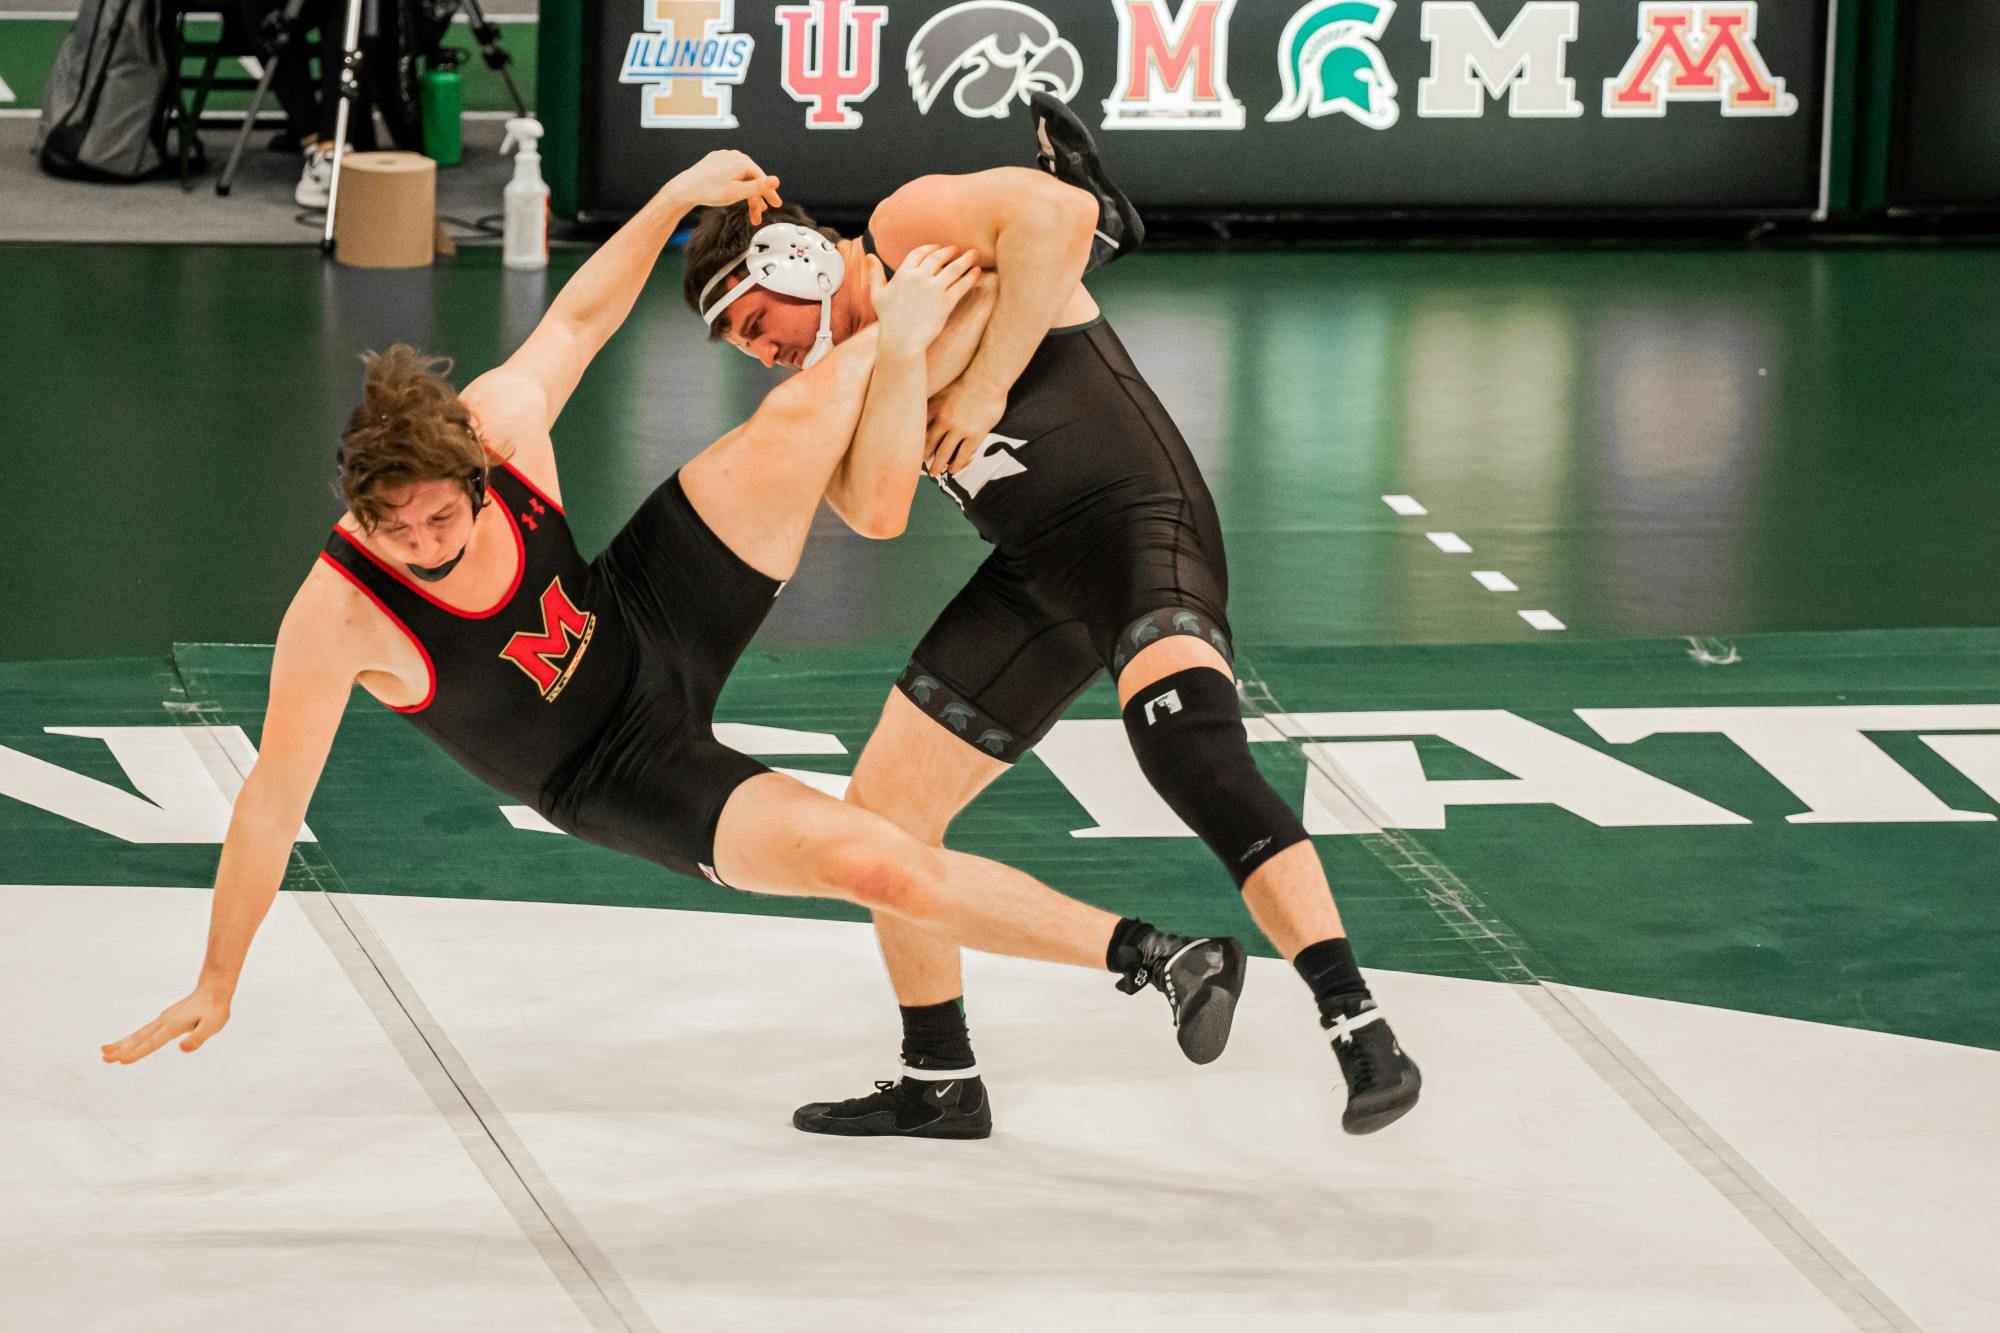 <p>Then-redshirt junior Brad Wilton uses a takedown technique on Maryland then-redshirt freshman Connor Bowes on Jan. 16, 2021. Wilton won the heavyweight bout by technical fall.</p>